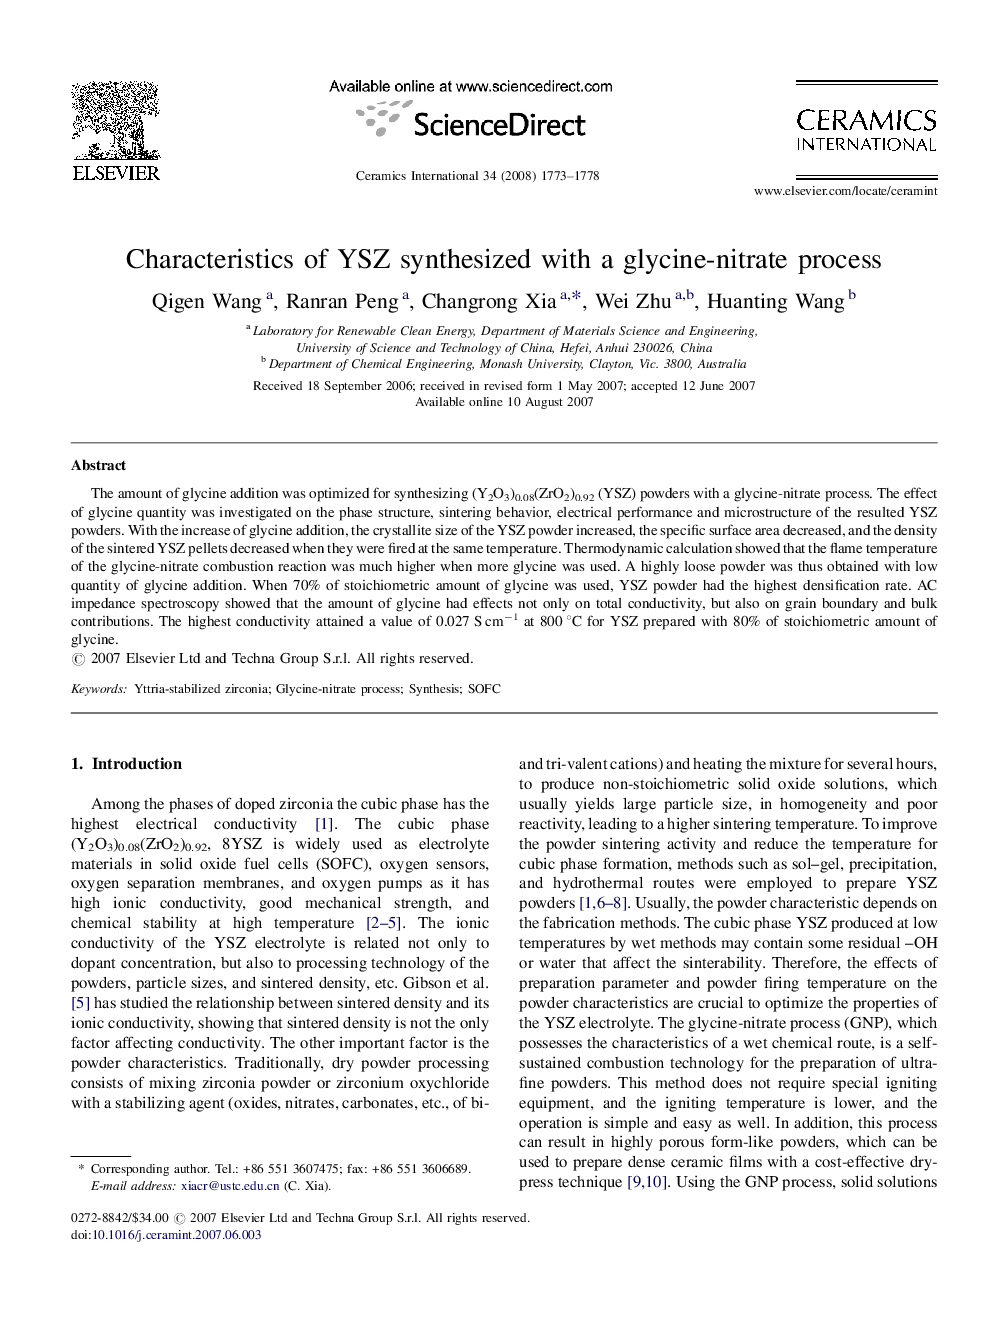 Characteristics of YSZ synthesized with a glycine-nitrate process